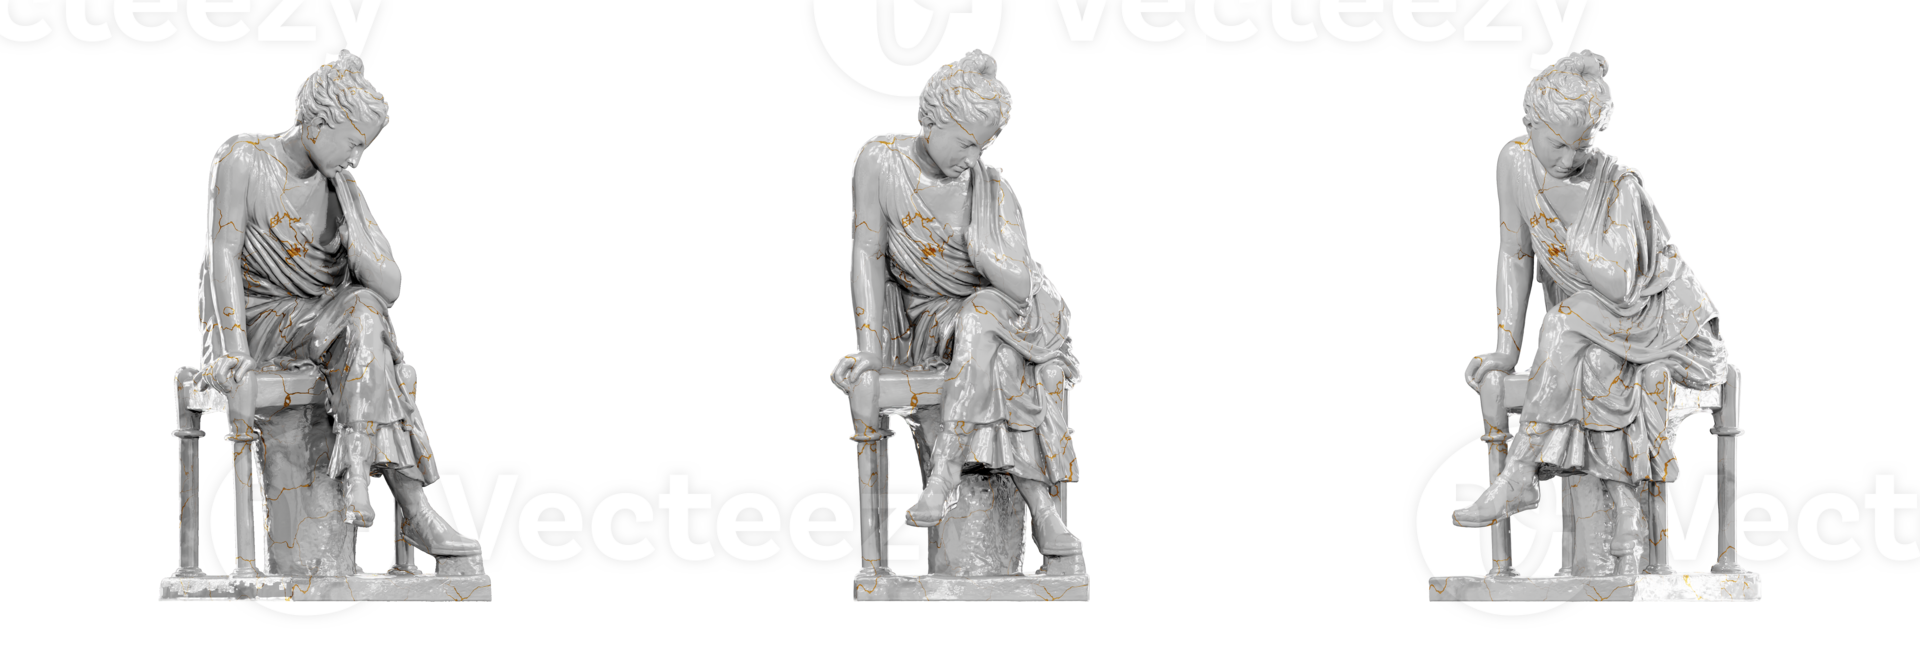 Stunning 3D render of a Hadrianic period sculpture depicting a seated girl png